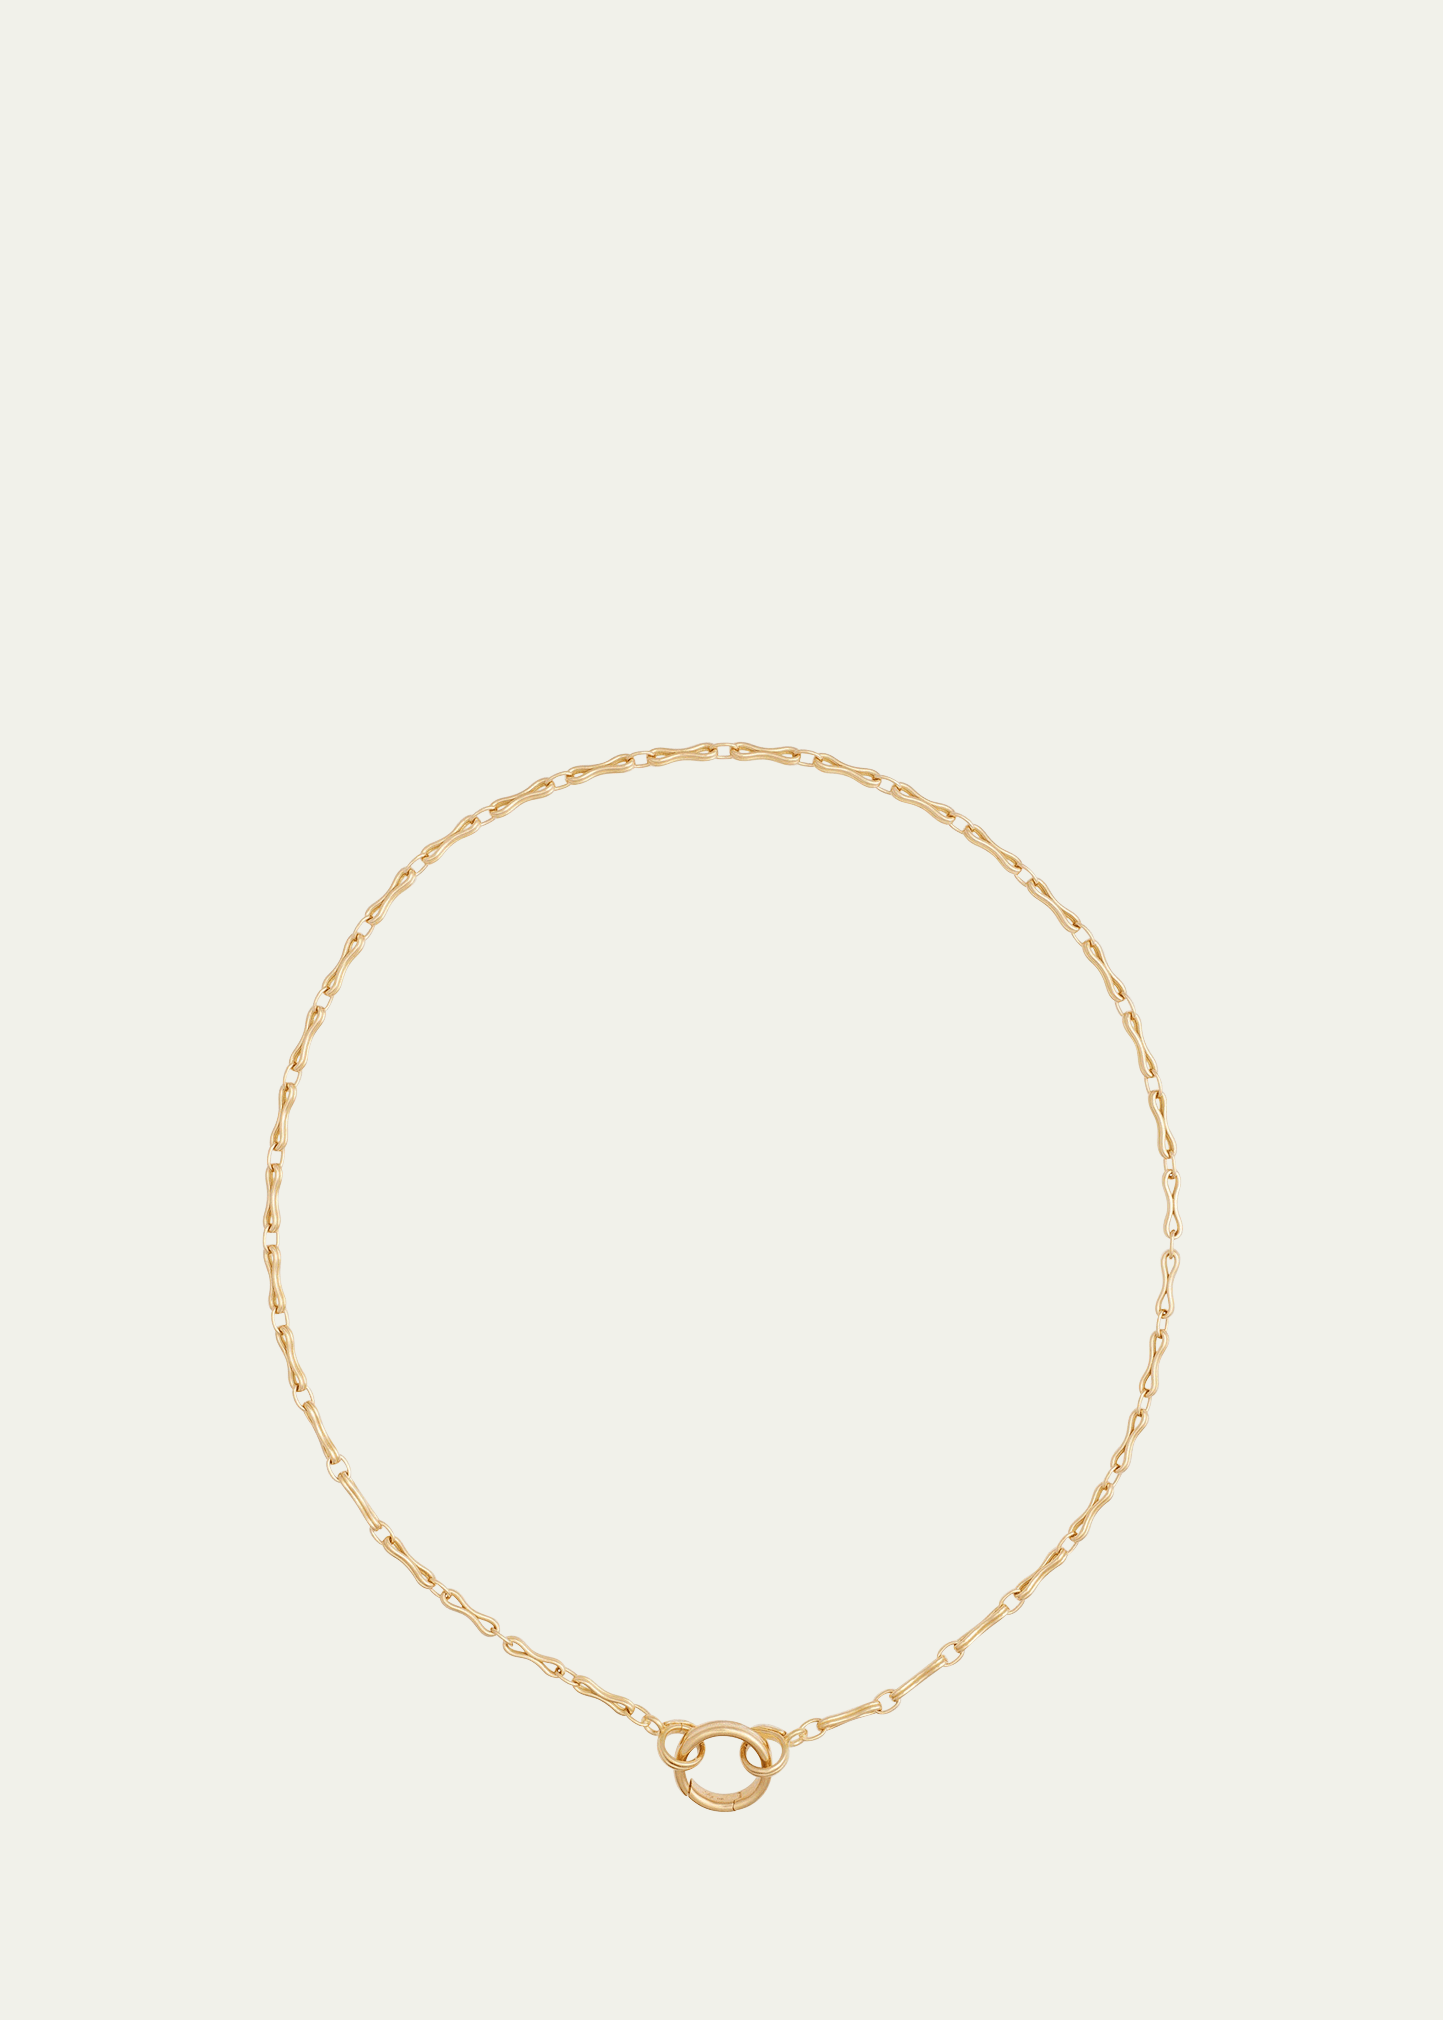 Sherman Field, 1967 18k Yellow Gold Convertible Column Chain Necklace With Medium Links, 20"l In Yg